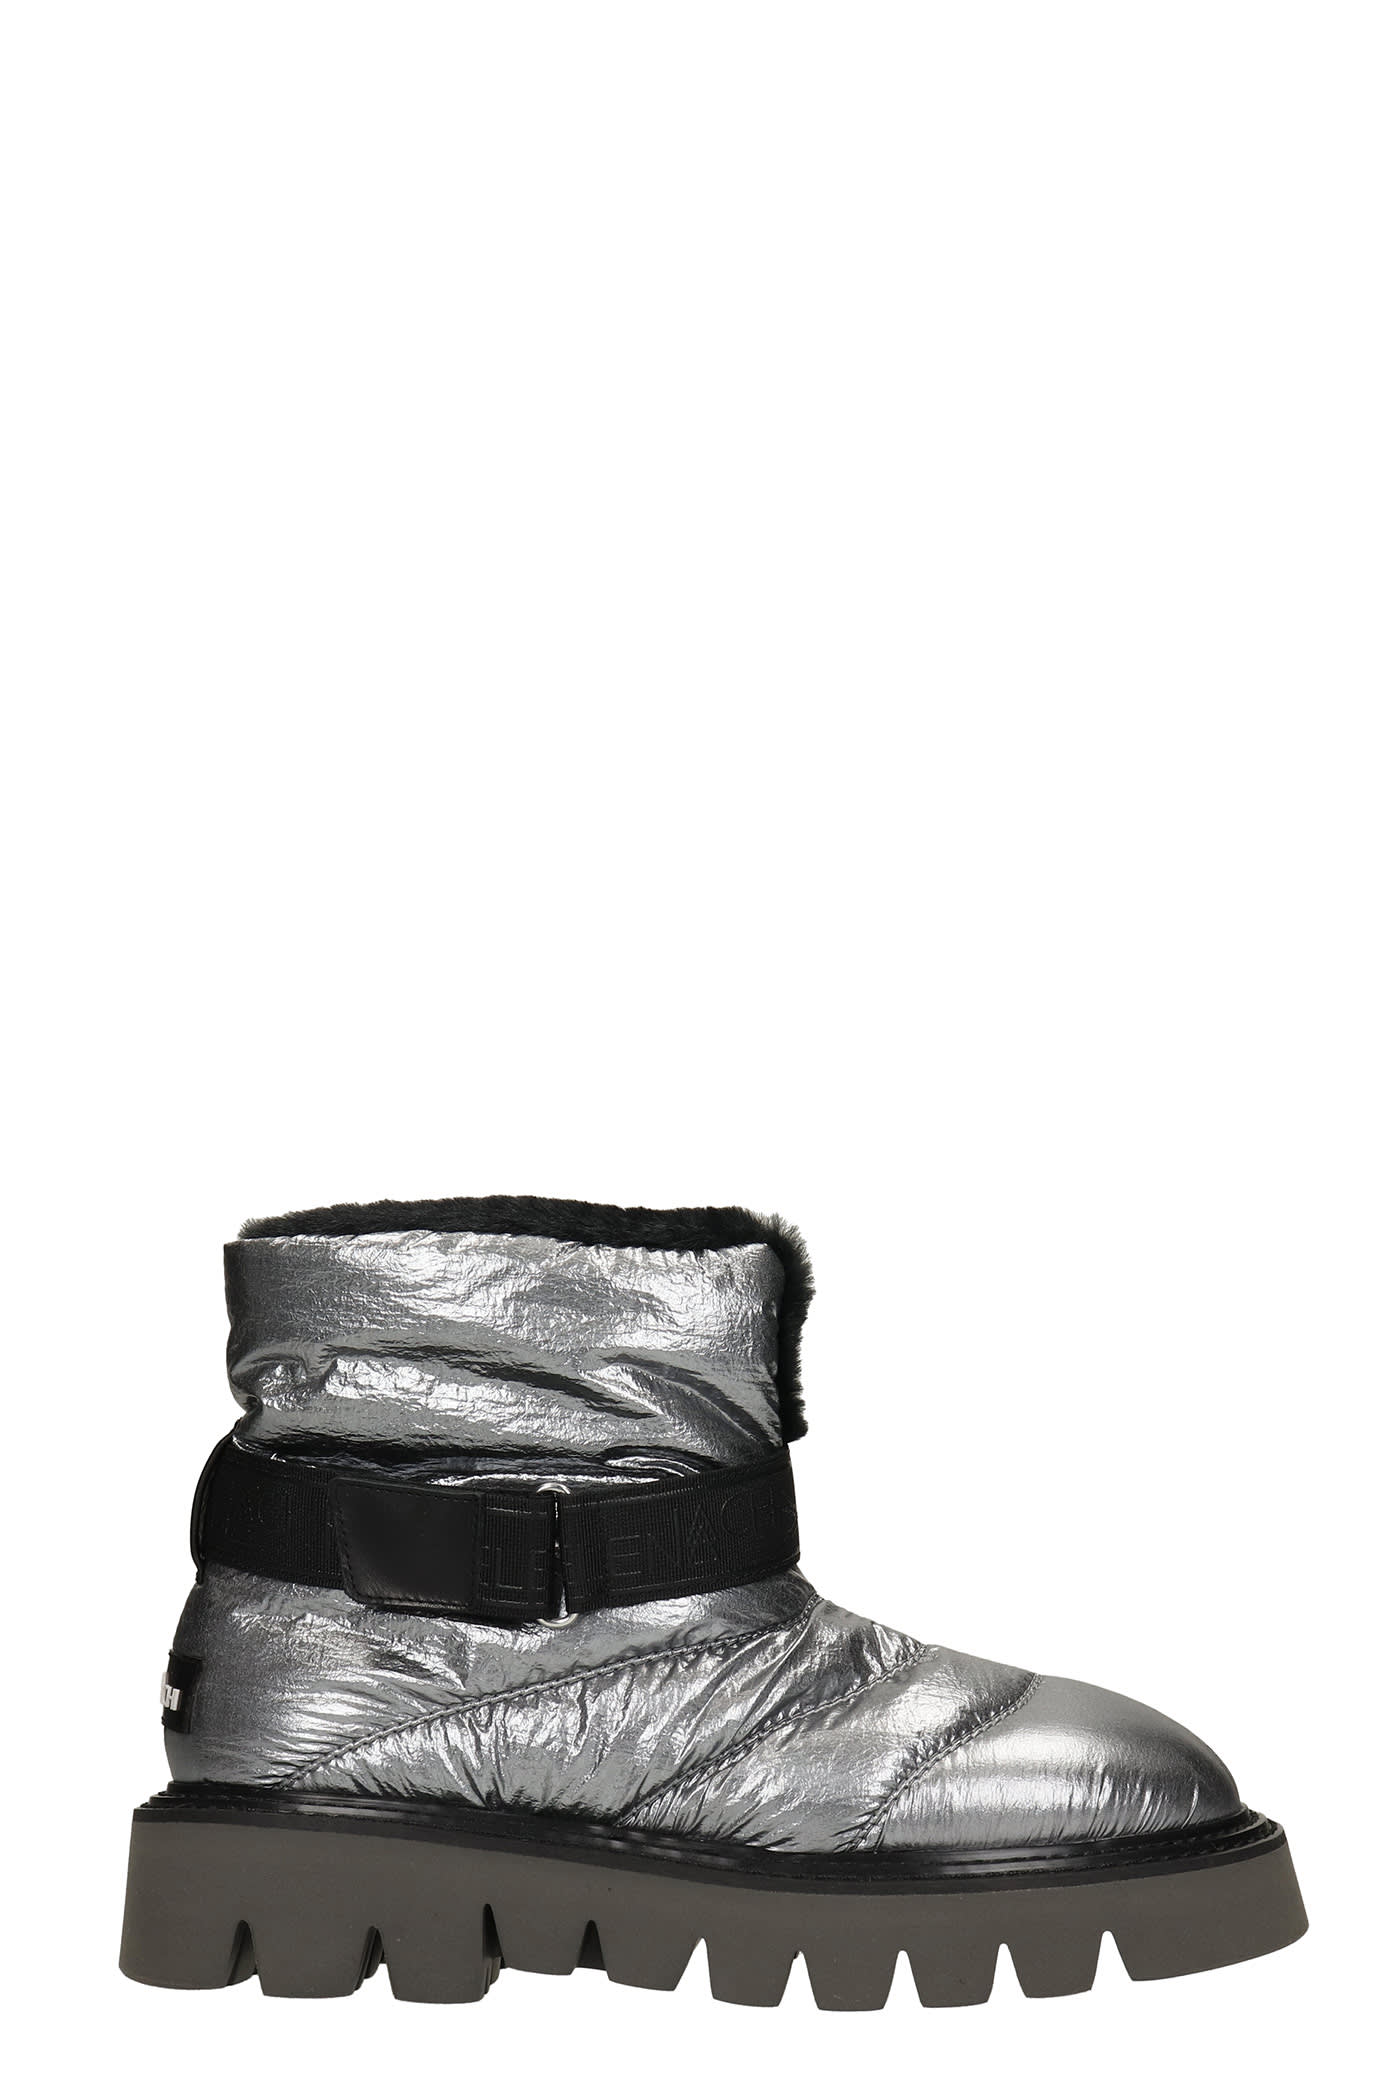 Elena Iachi Low Heels Ankle Boots In Silver Leather